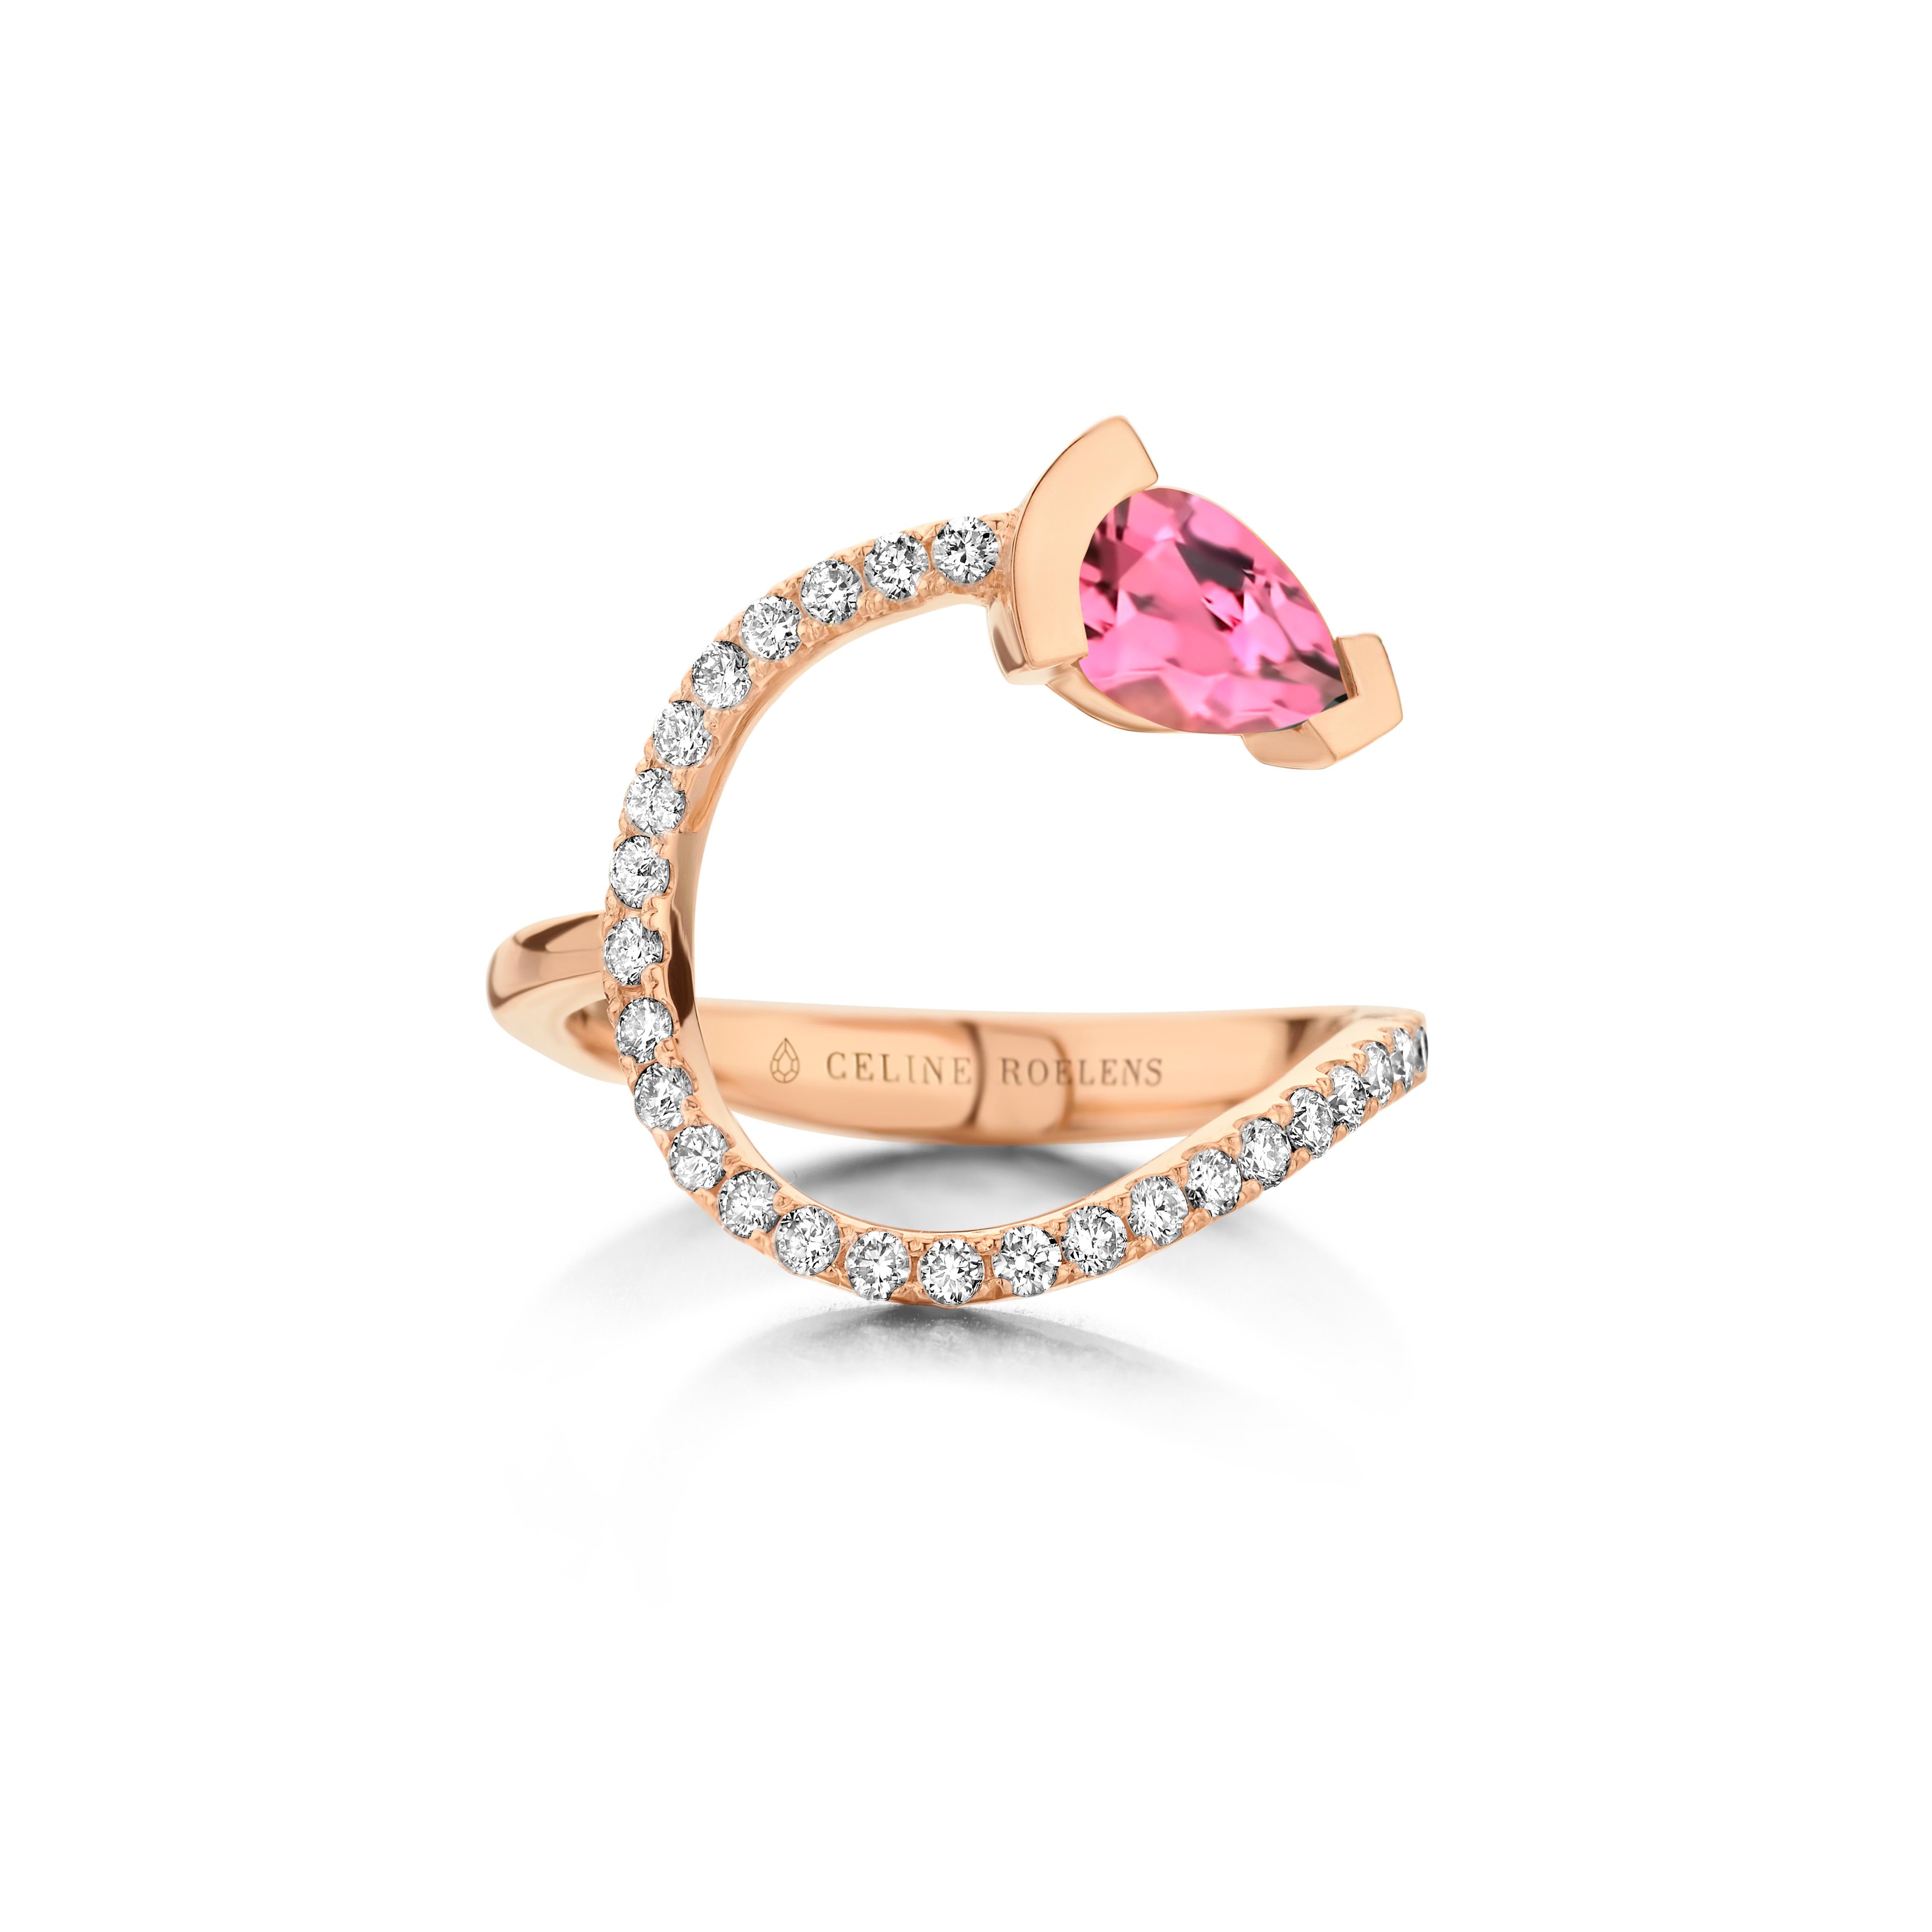 ADELINE curved ring in 18Kt yellow gold set with a pear shaped Pink tourmaline and 0,33 Ct of white brilliant cut diamonds - VS F quality.